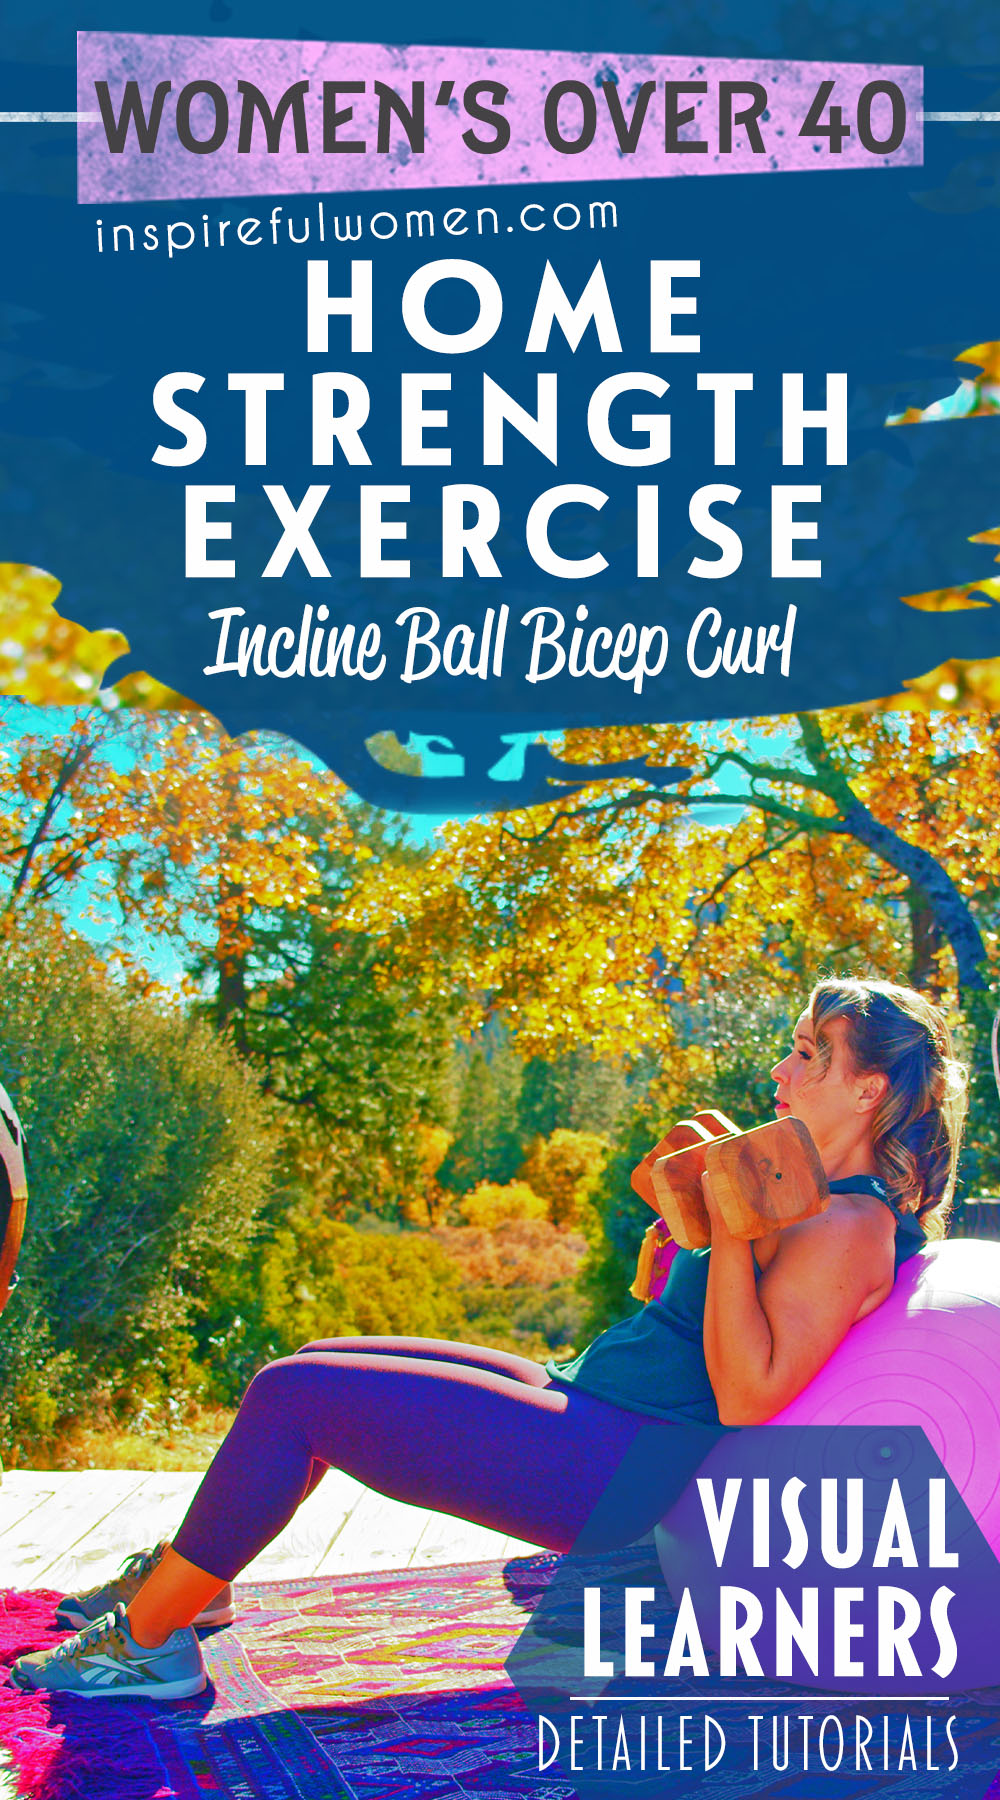 bicep-curl-alternative-incline-supine-stability-ball-dumbbell-arm-exercise-at-home-women-40+